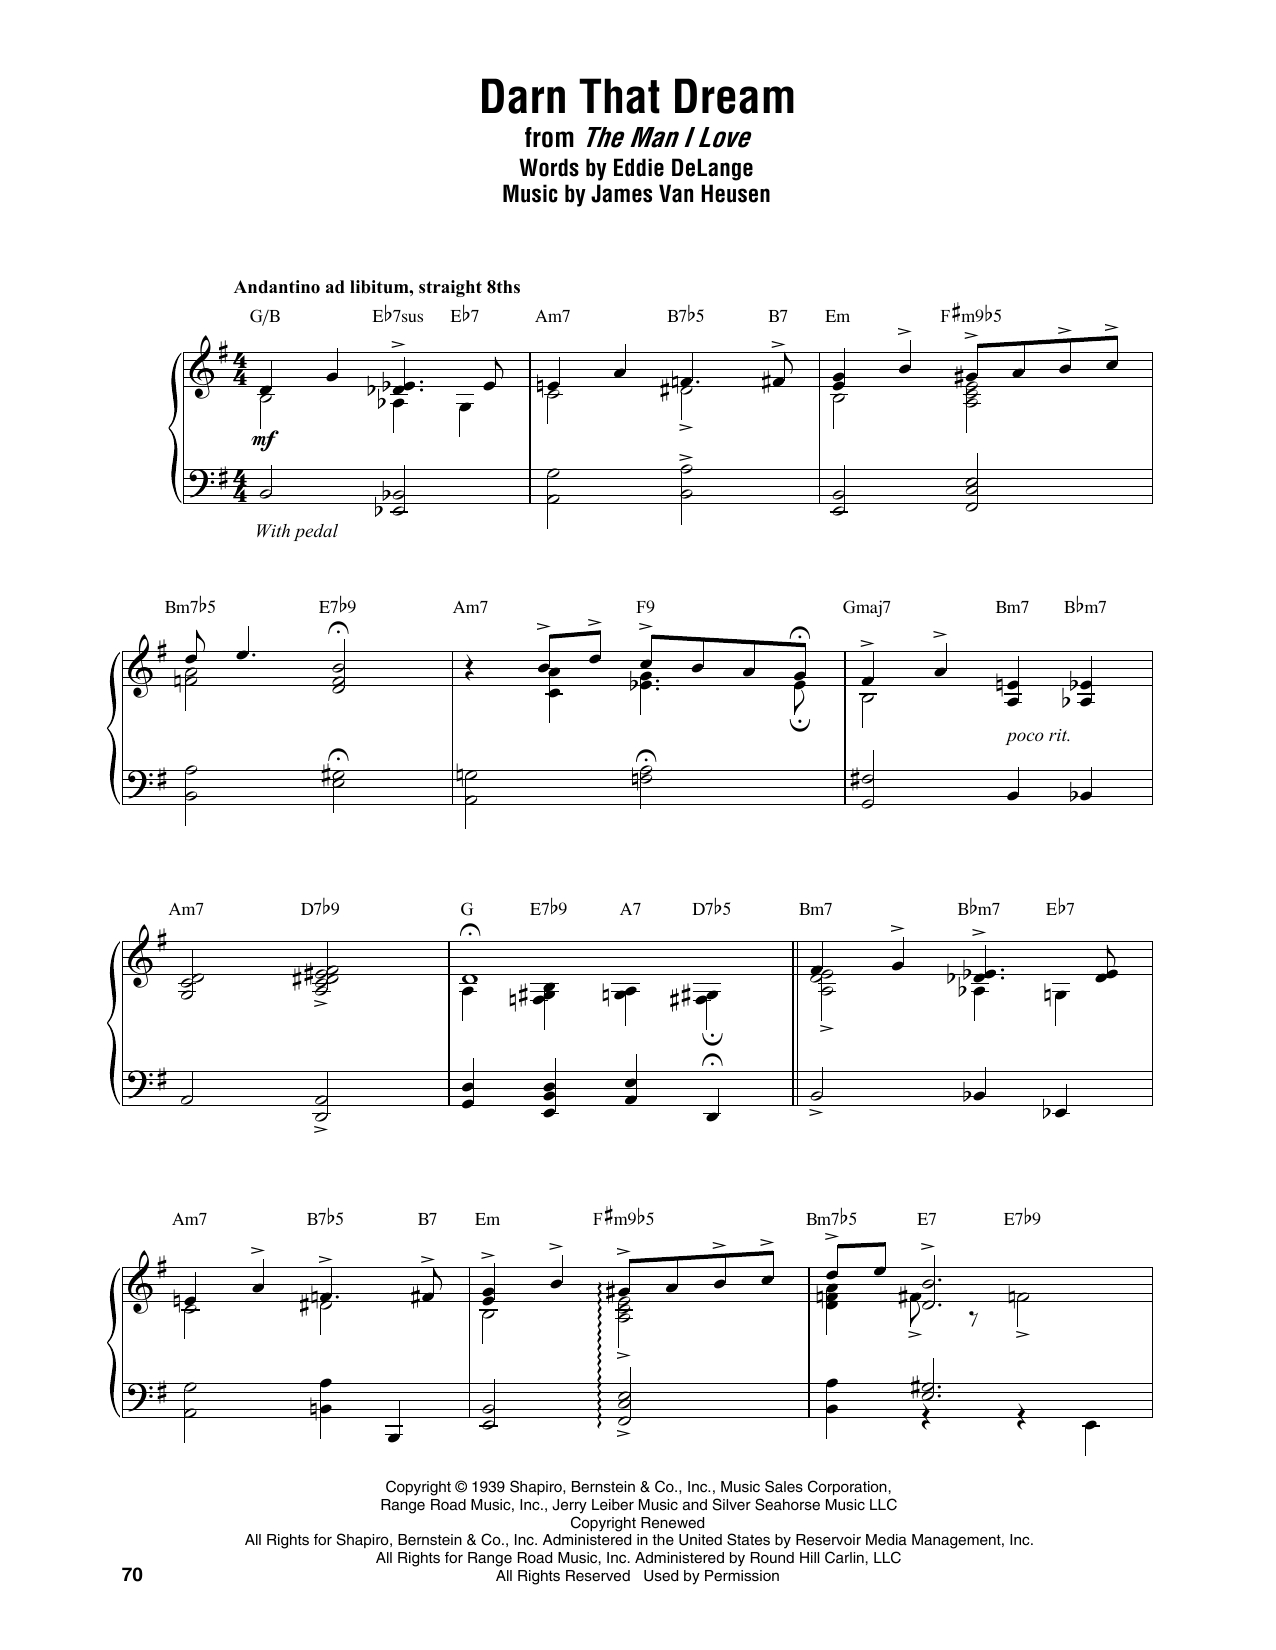 Download Thelonious Monk Darn That Dream Sheet Music